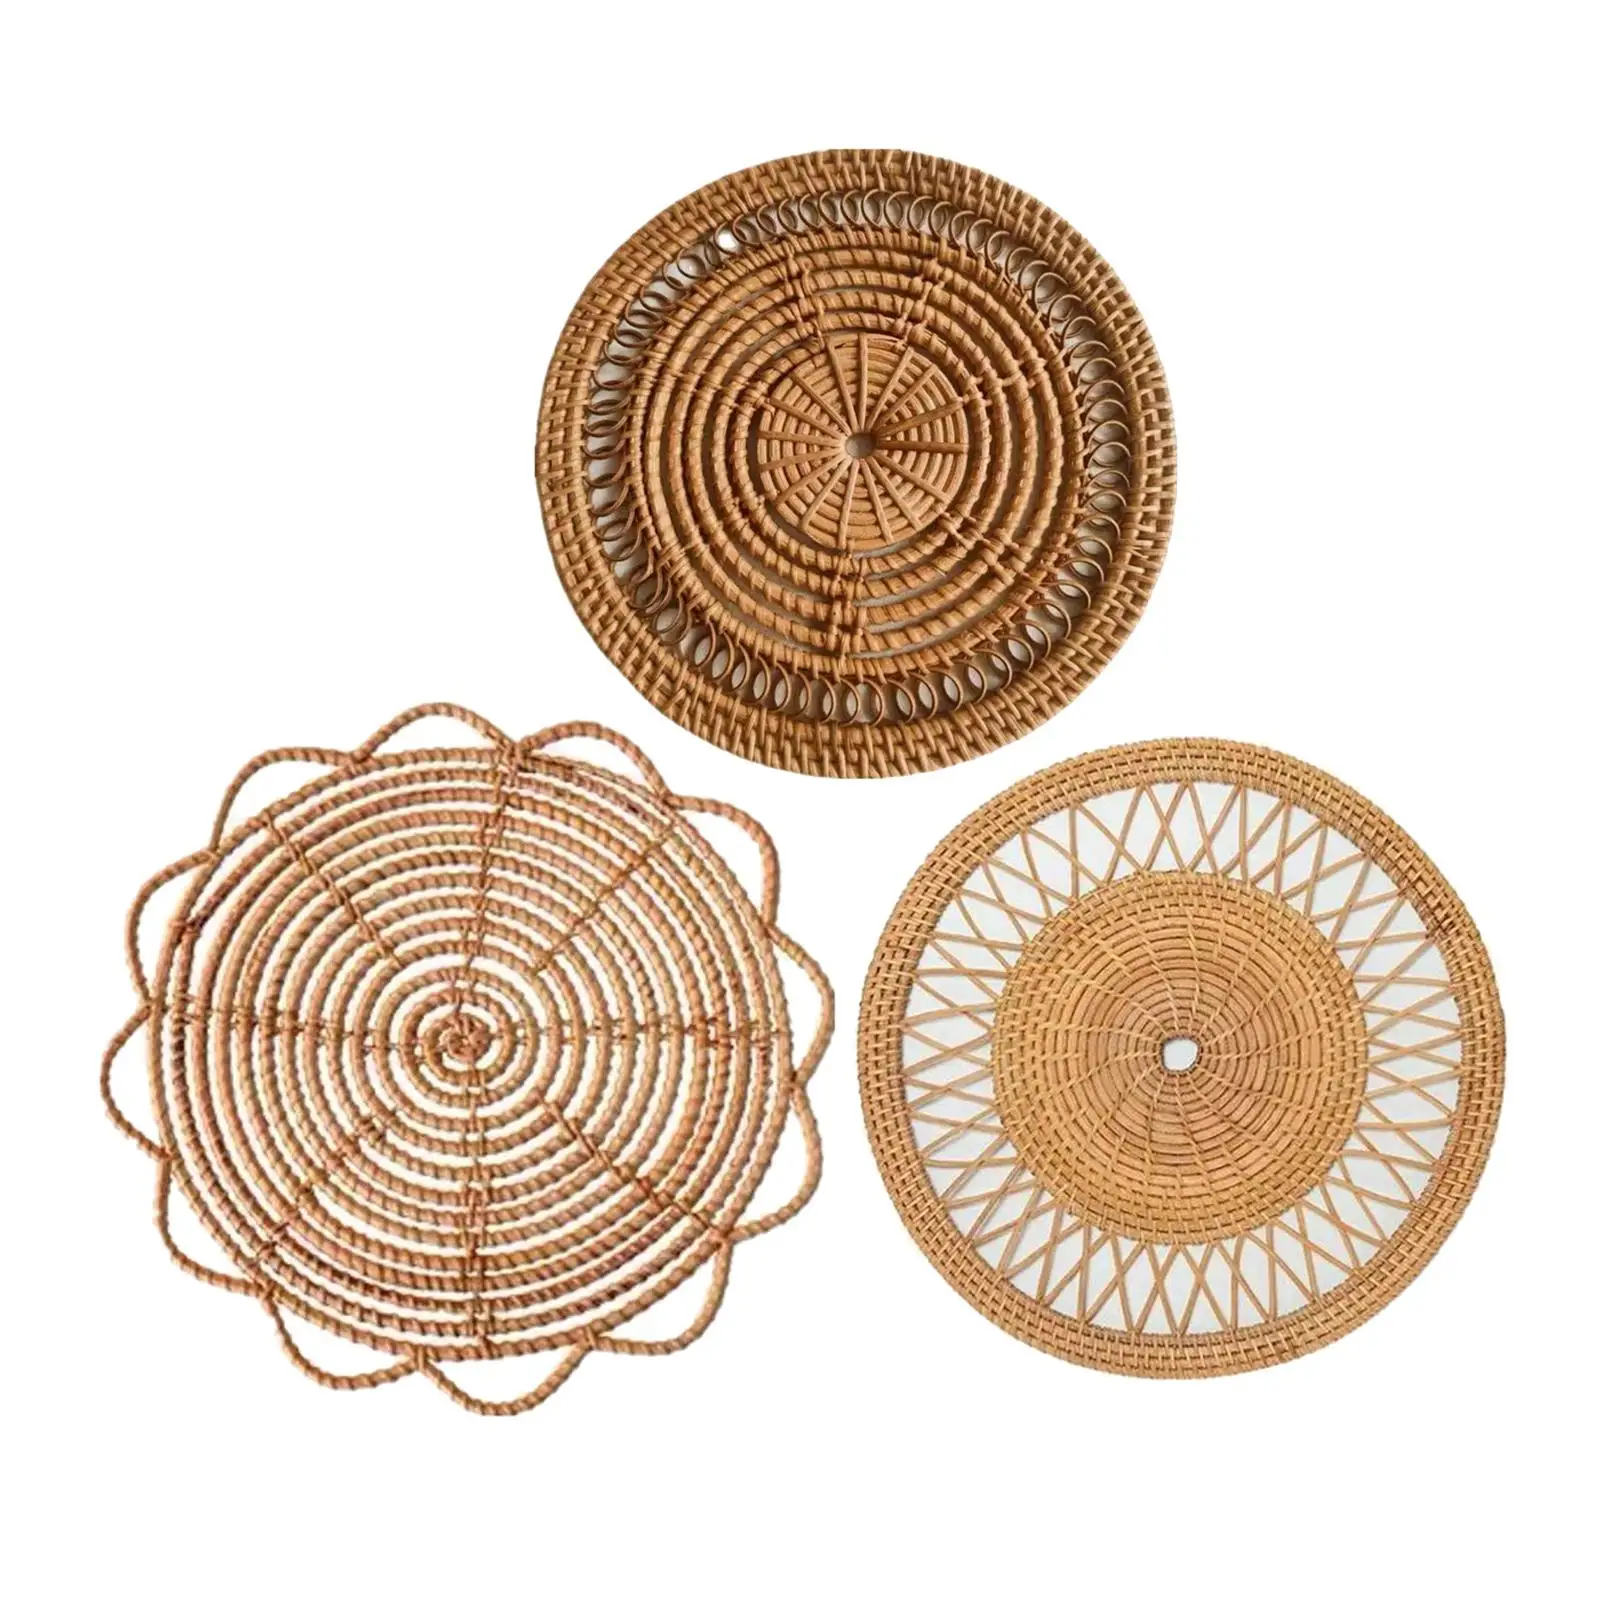 Wall Art Mural Basket Decor Bowl Mats Coasters for Living Room Bed Room